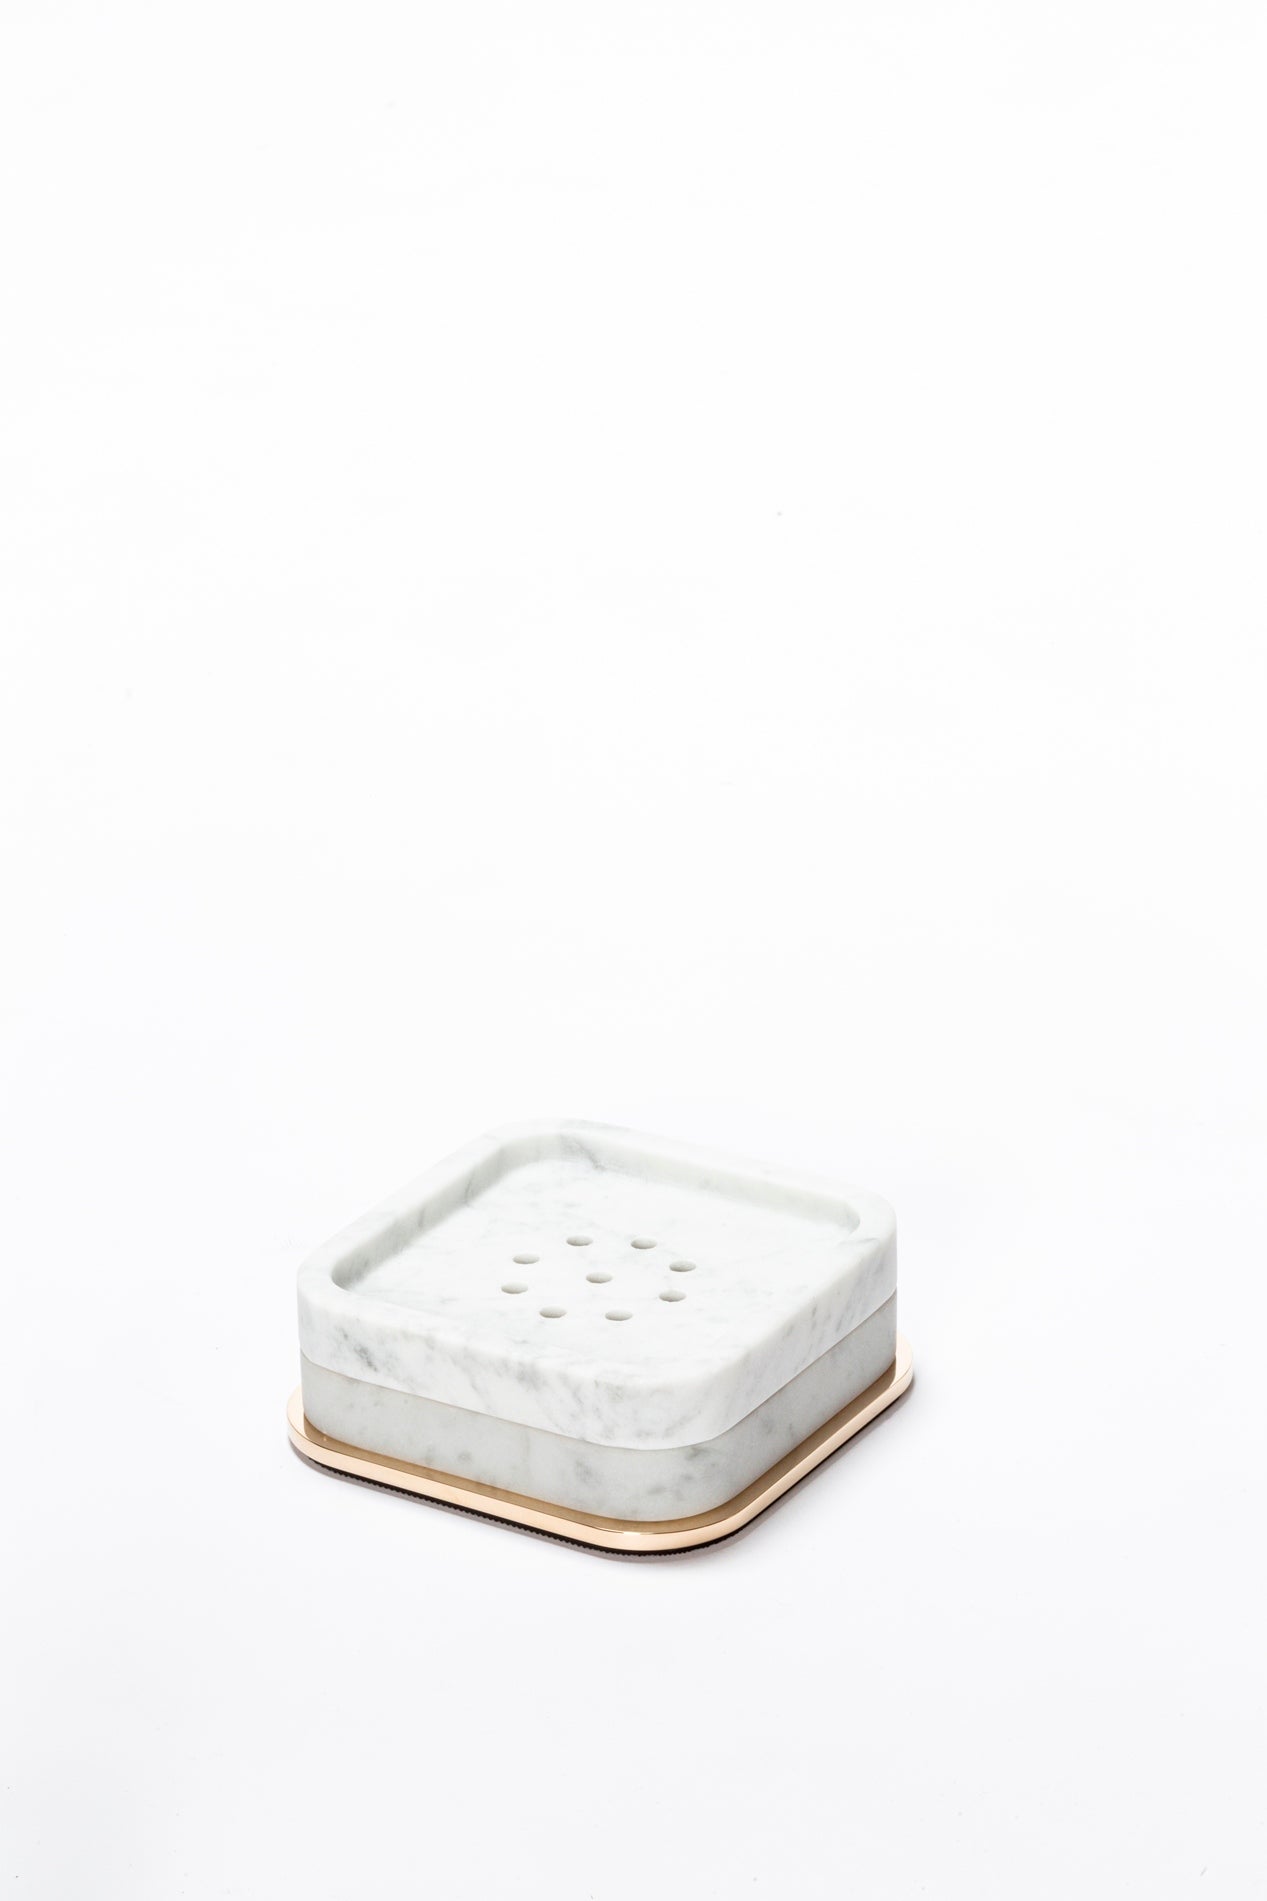 Giobagnara Polo Marble Square Soap Bowl | Marble Structure with Brass Base Frame | Non-Slip Waterproof Rubber Base | Part of Polo Marble Bathroom Set | Iconic Silhouette with Rounded Corners | Unique and Exclusive Design | Explore the Polo Marble Bathroom Collection at 2Jour Concierge, #1 luxury high-end gift & lifestyle shop